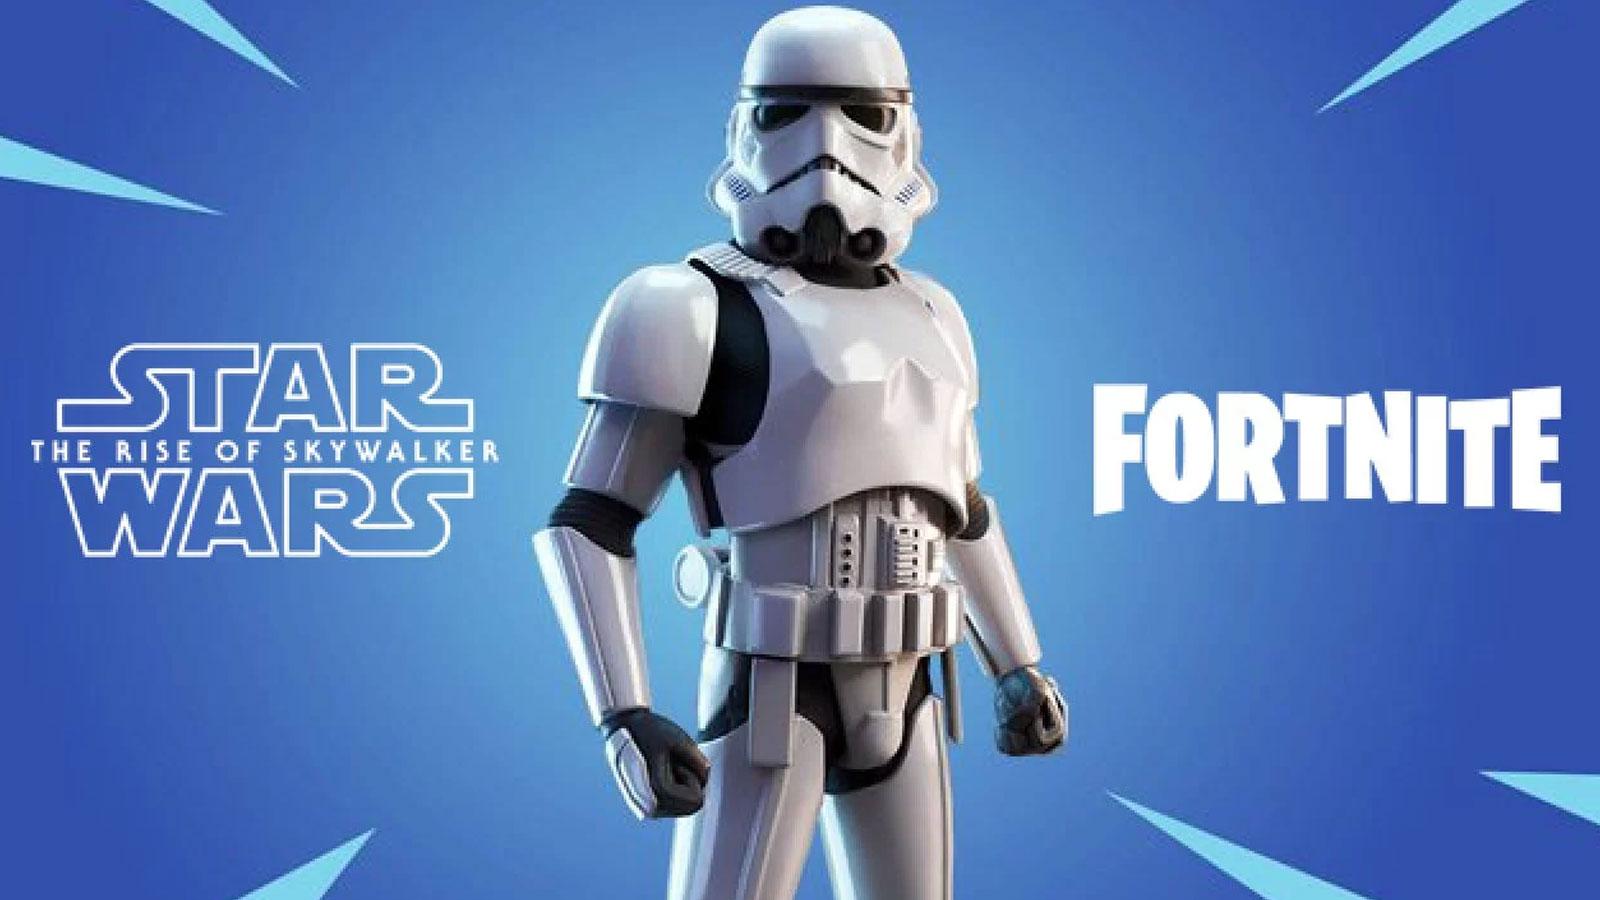 Roblox team up with Star Wars: The Rise of Skywalker for their